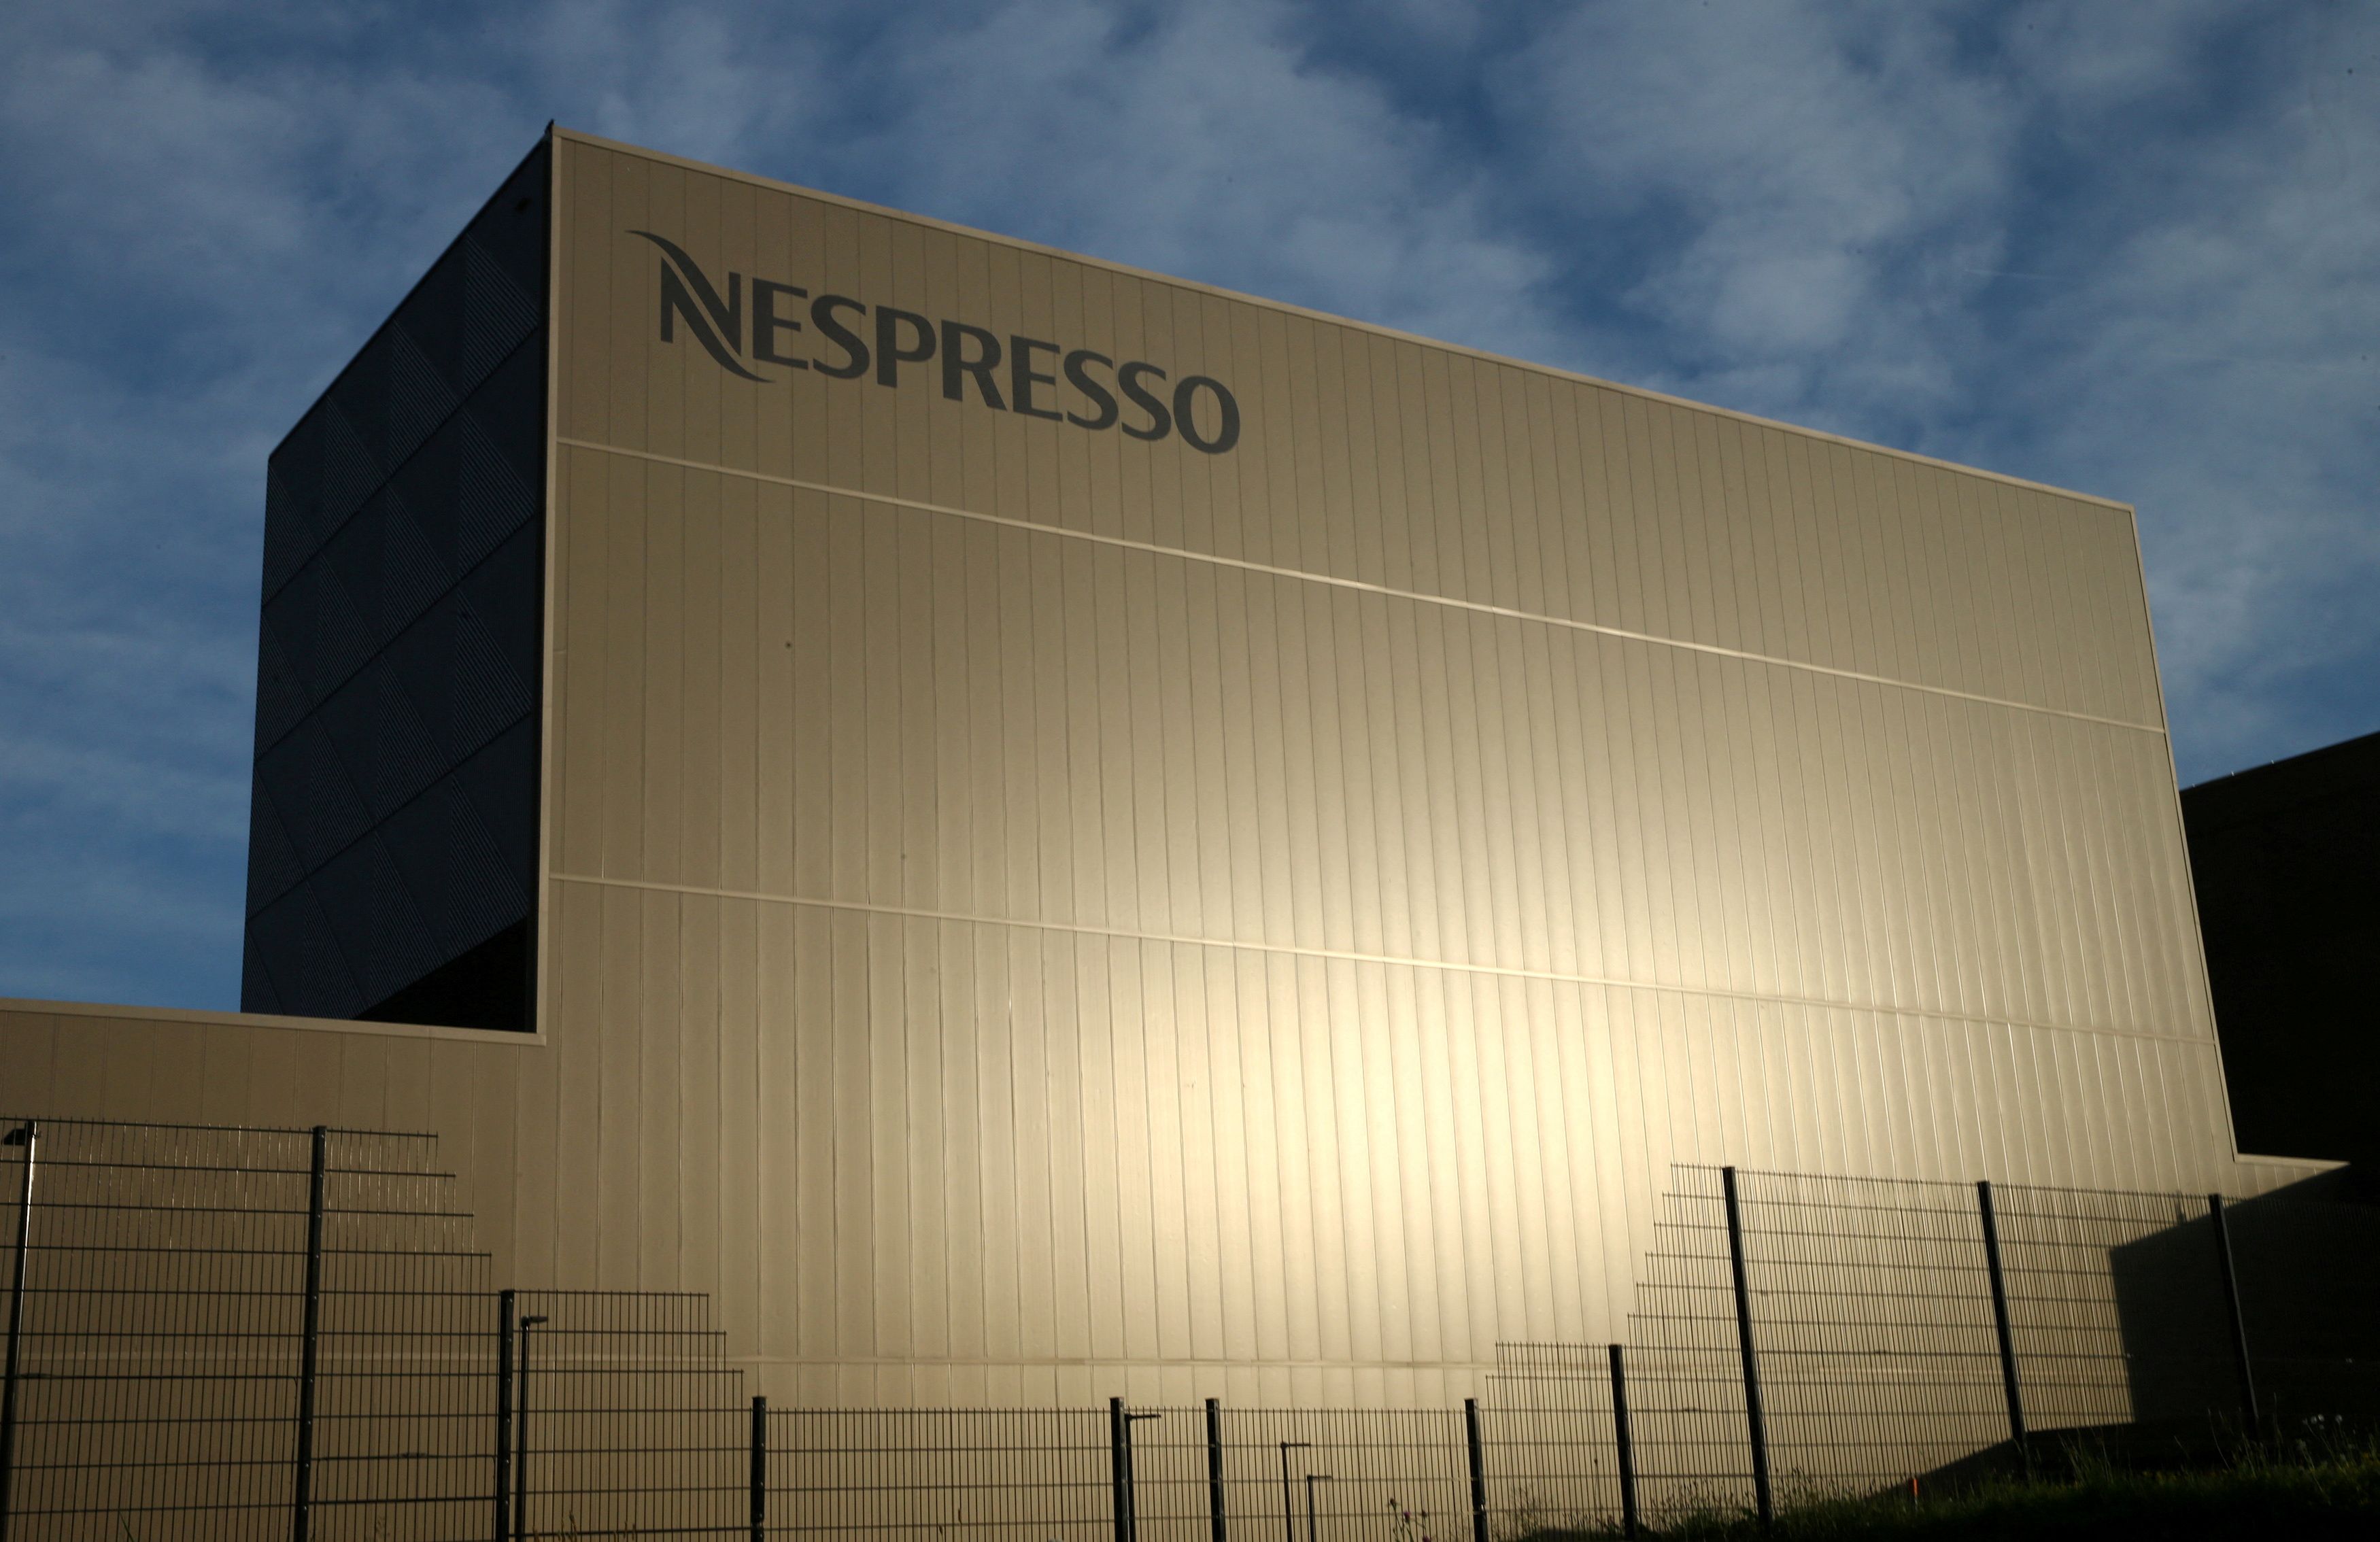 Over 500 kg of Cocaine Found in Coffee Delivery for Nespresso in Western Switzerland